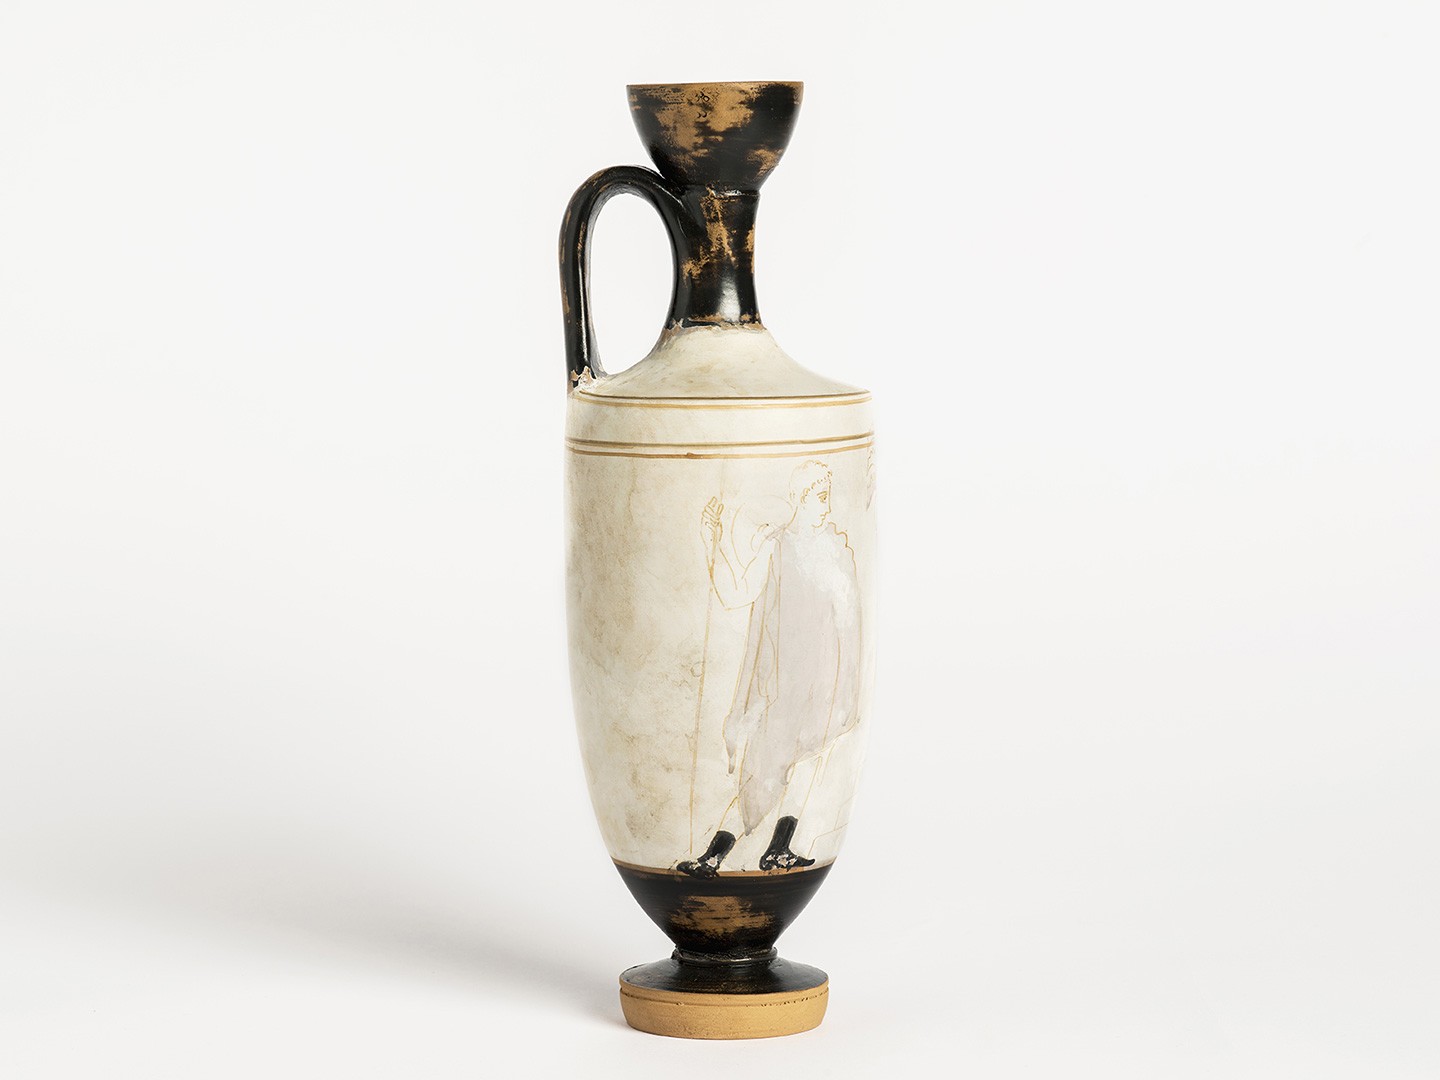 Type of perfume vase or white lekythos. This ceramic vessel was used for storing perfumes or oil.